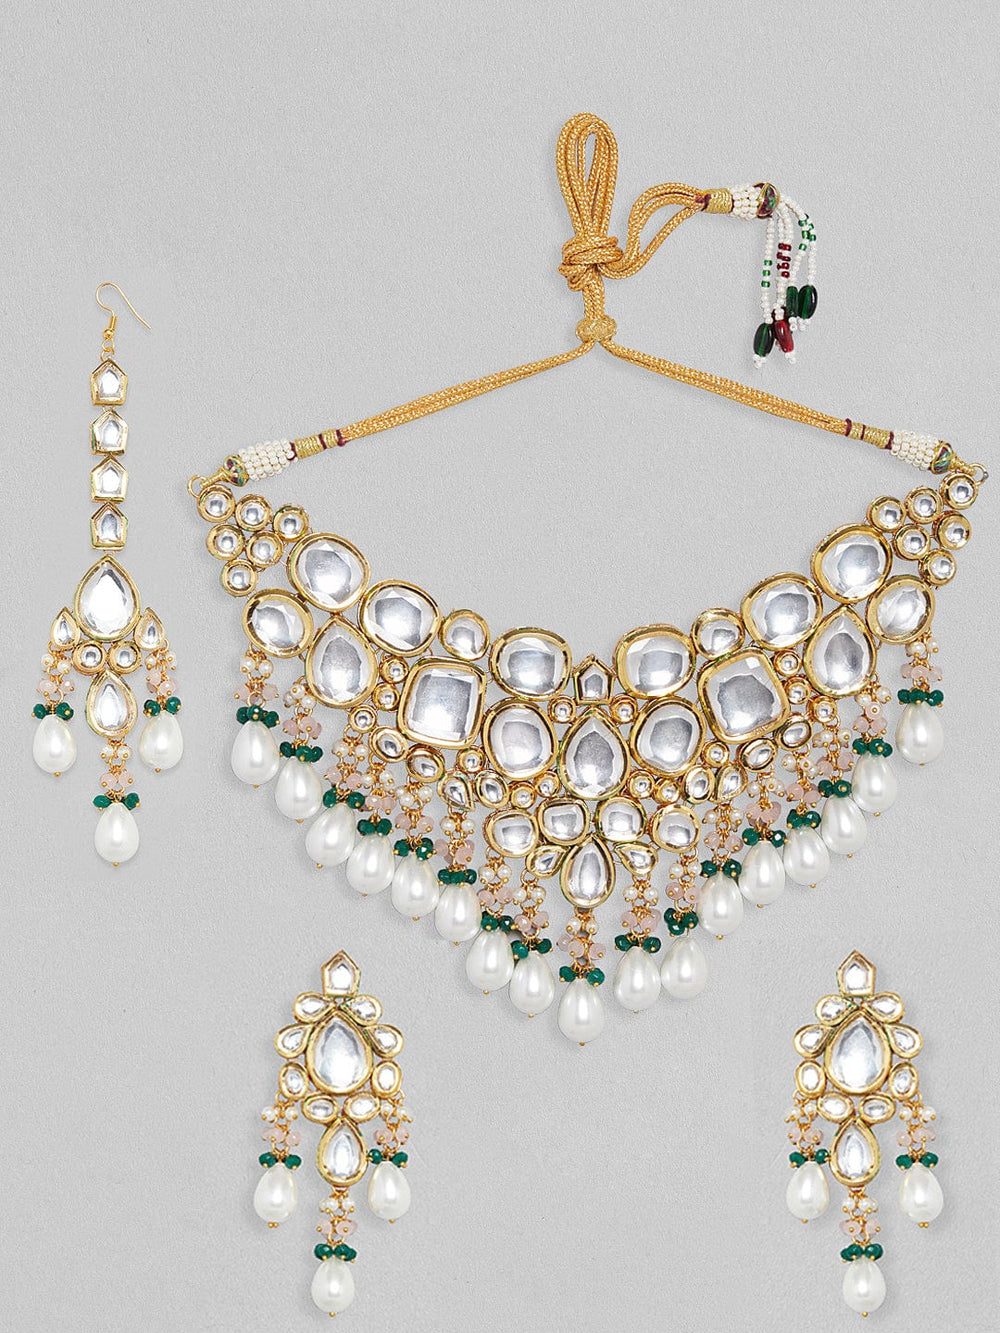 Komal pandey in Rubans 22K Gold Plated Kundan Necklace Set With Green Beads And Pearls Necklaces